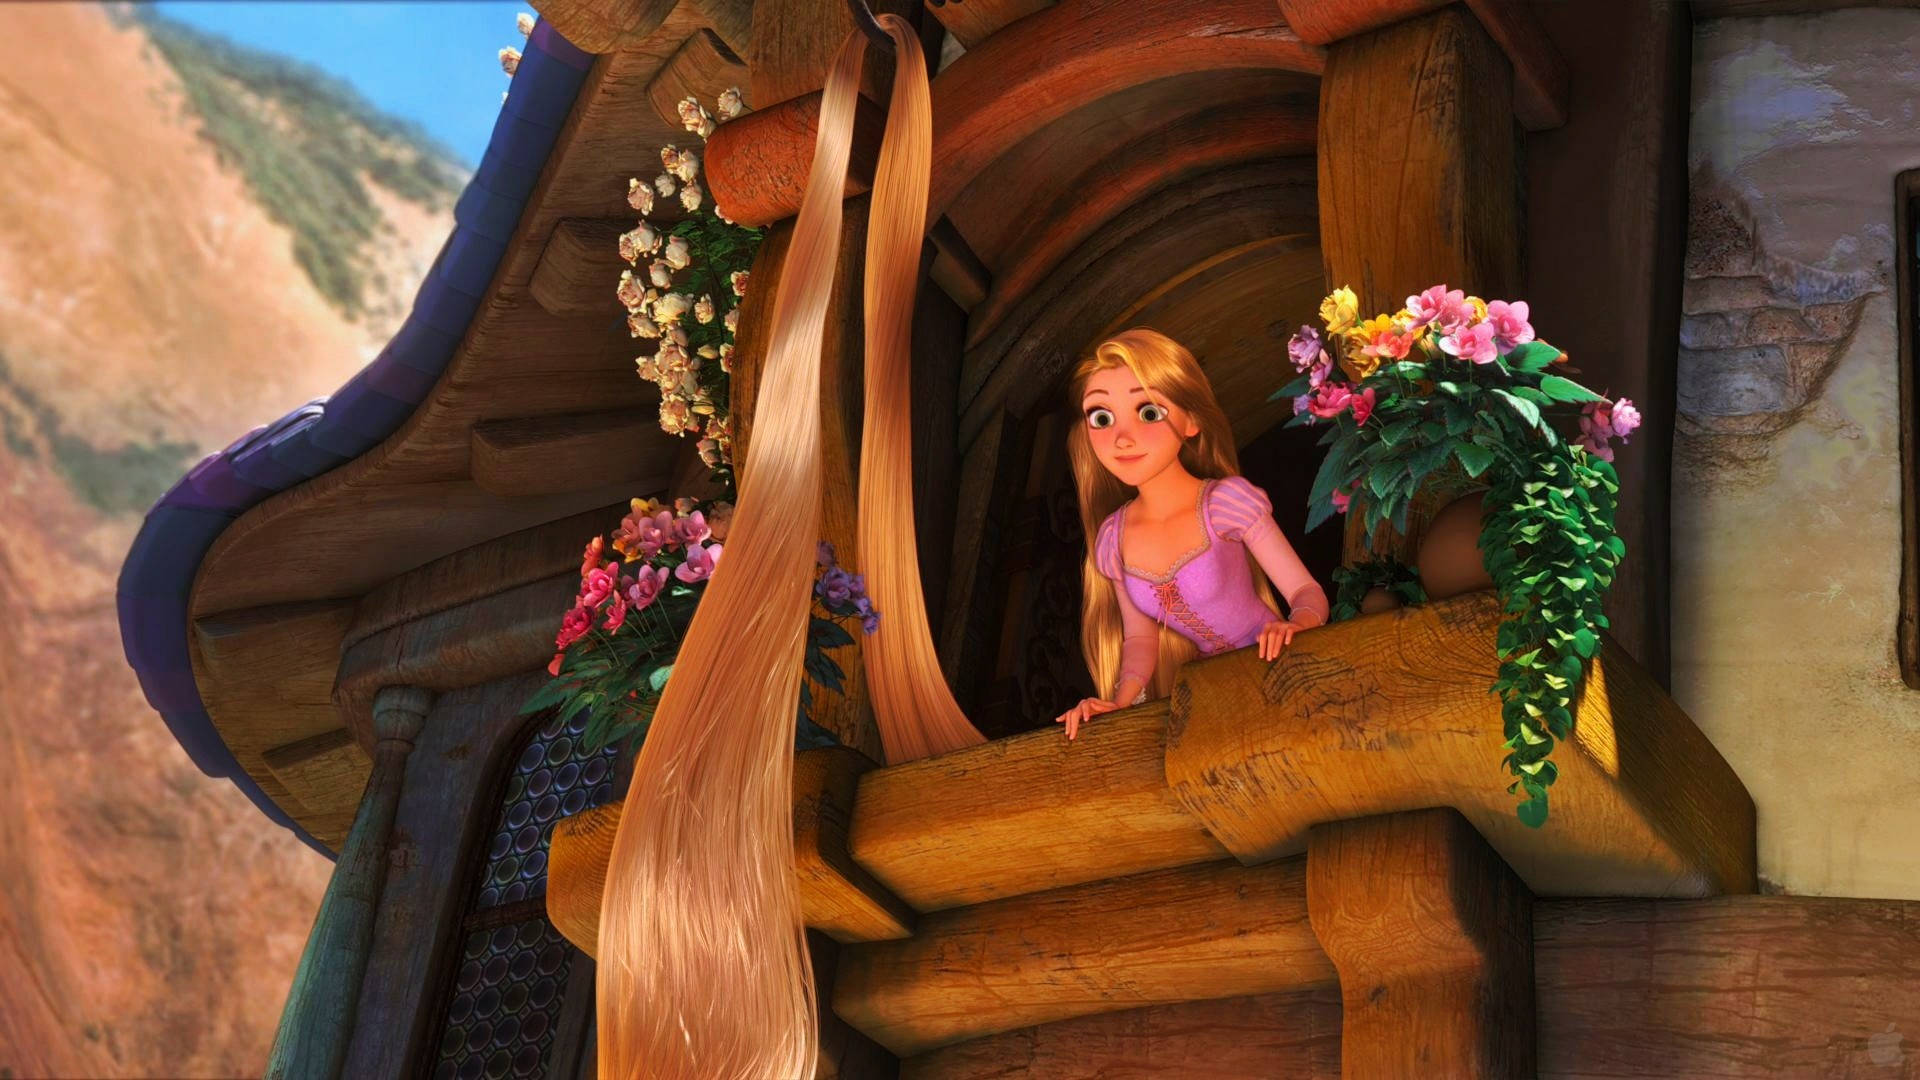 Rapunzel Patiently Awaits Her Rescue At Her Tower Window. Background